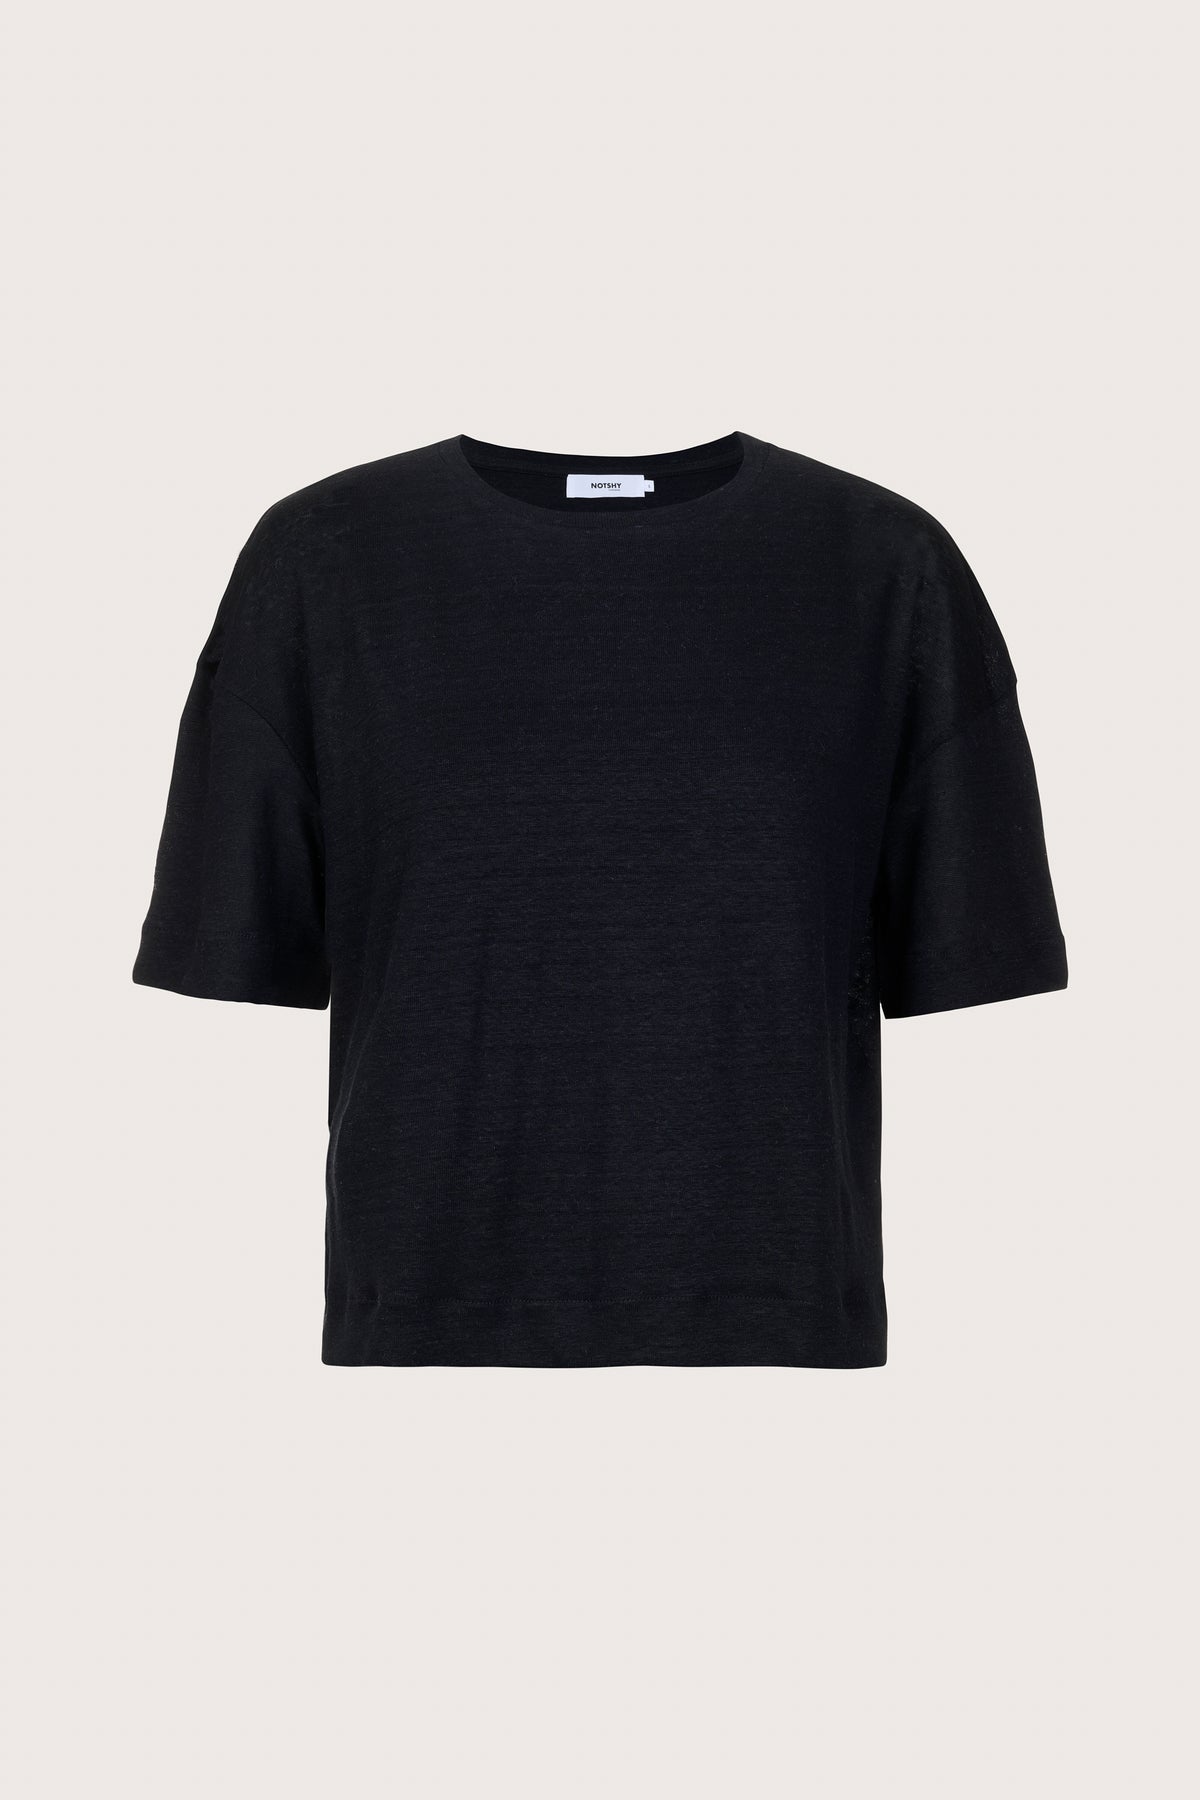 black boxy fit tee with round neck 